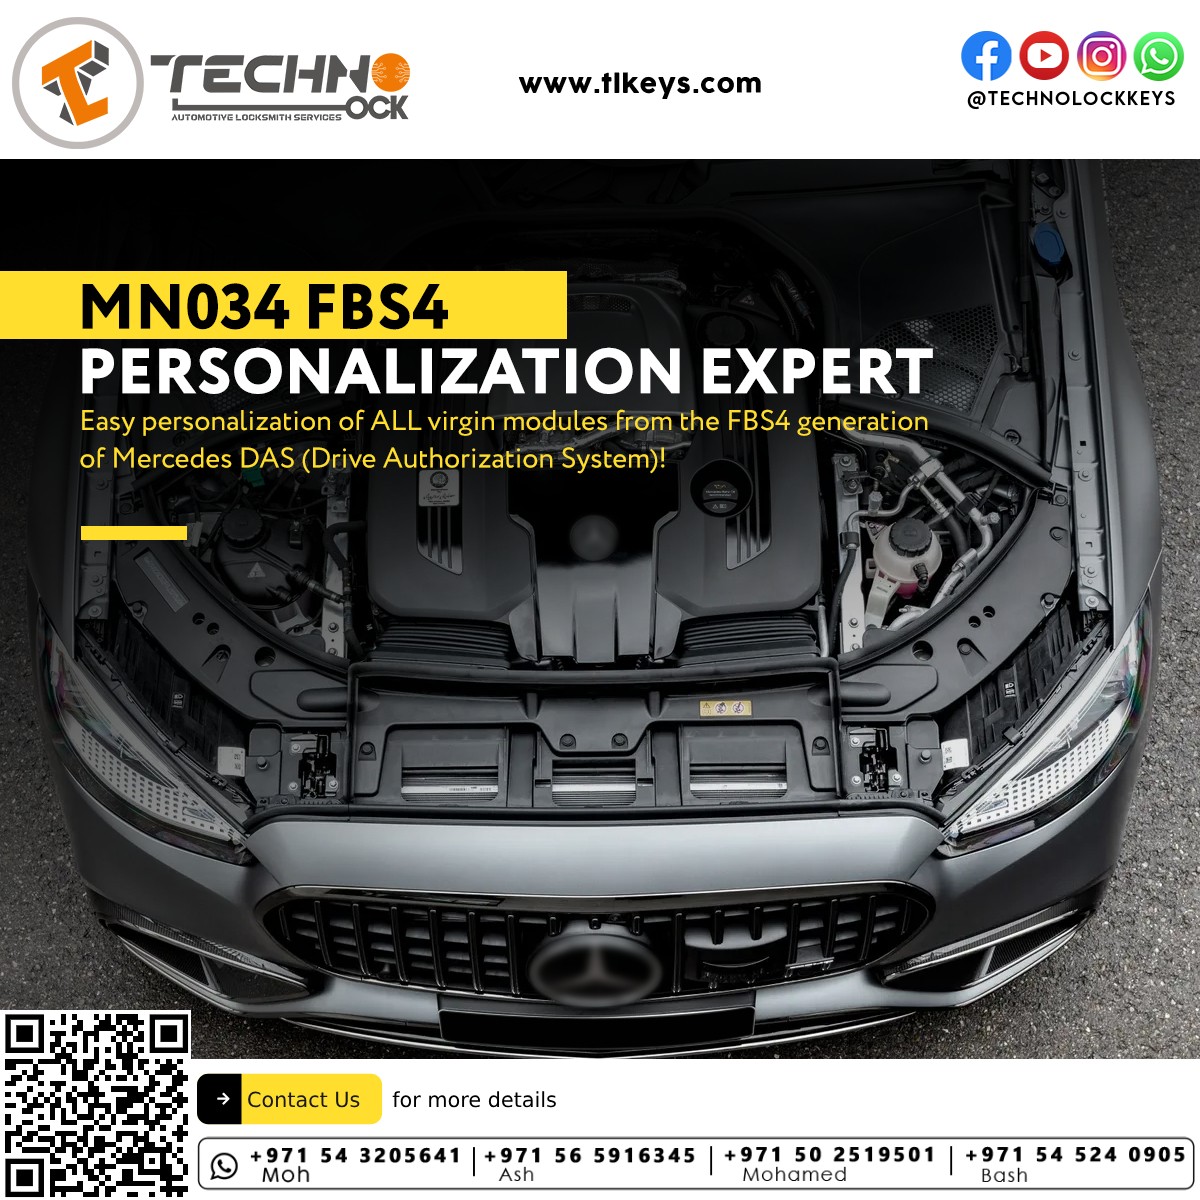 Mercedes DAS FBS4 system with MN034 Personalization Expert